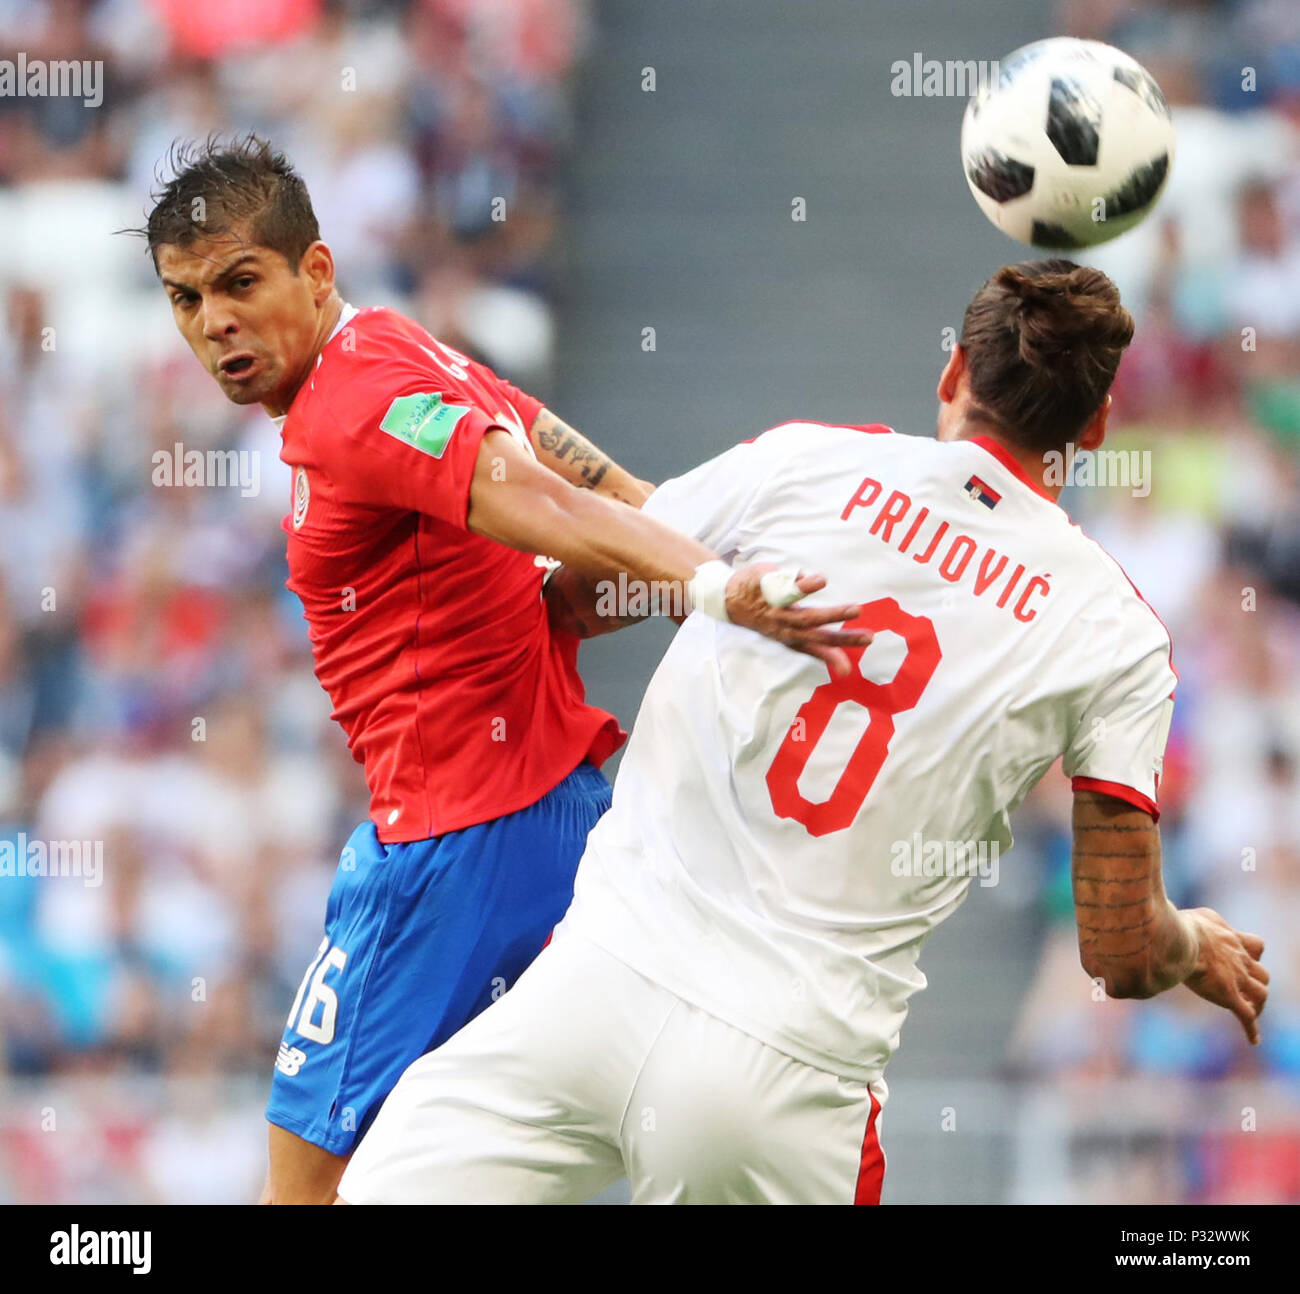 Samara, Russia. 17th June, 2018. Cristian Gamboa (L) of Costa Rica competes for a header with Aleksandar Prijovic of Serbia during a group E match between Costa Rica and Serbia at the 2018 FIFA World Cup in Samara, Russia, June 17, 2018. Serbia won 1-0. Credit: Ye Pingfan/Xinhua/Alamy Live News Stock Photo